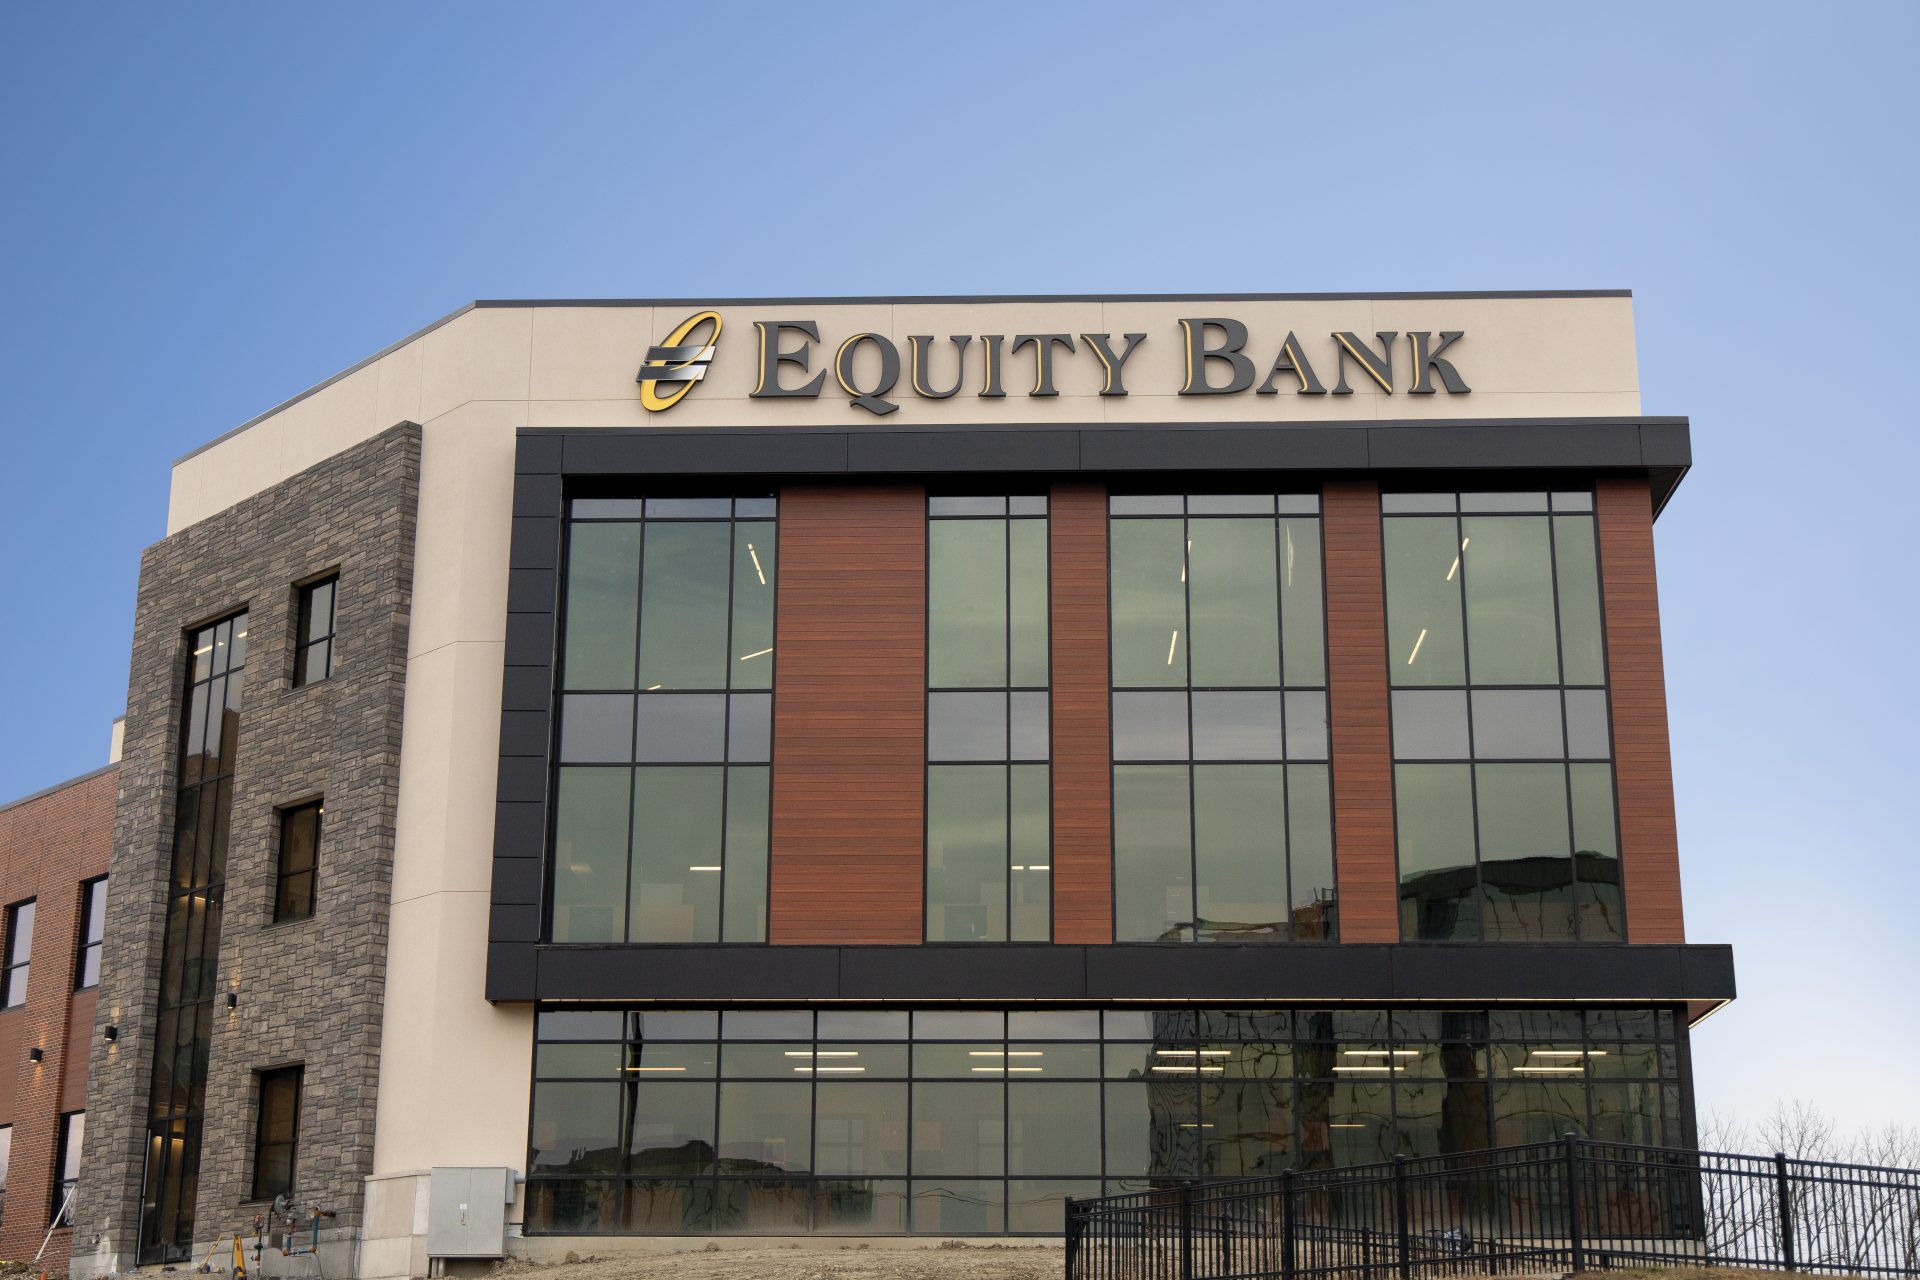 Equity Bank Overland Park branch exterior.